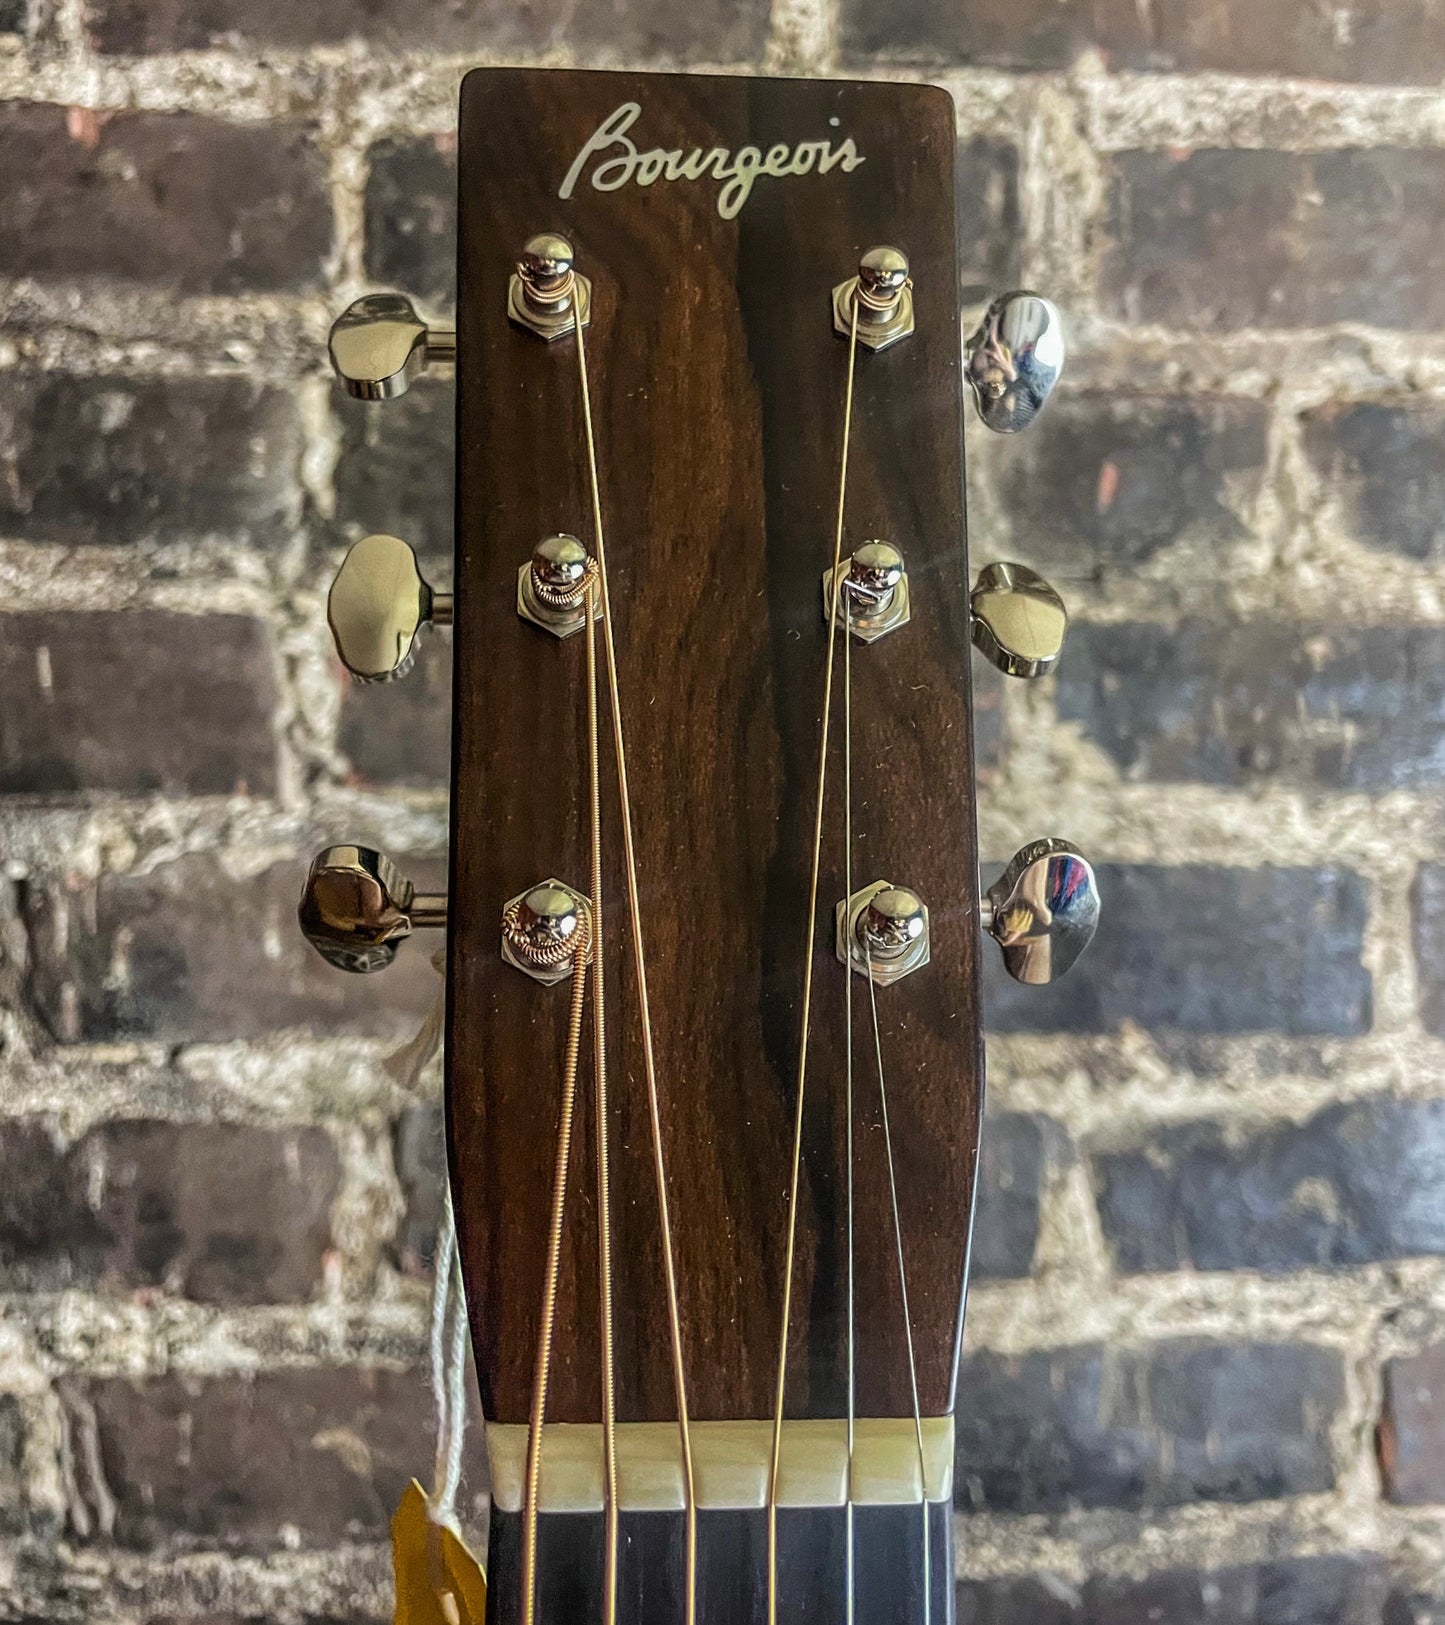 Bourgeois Touchstone Series Country Boy OM Acoustic Guitar